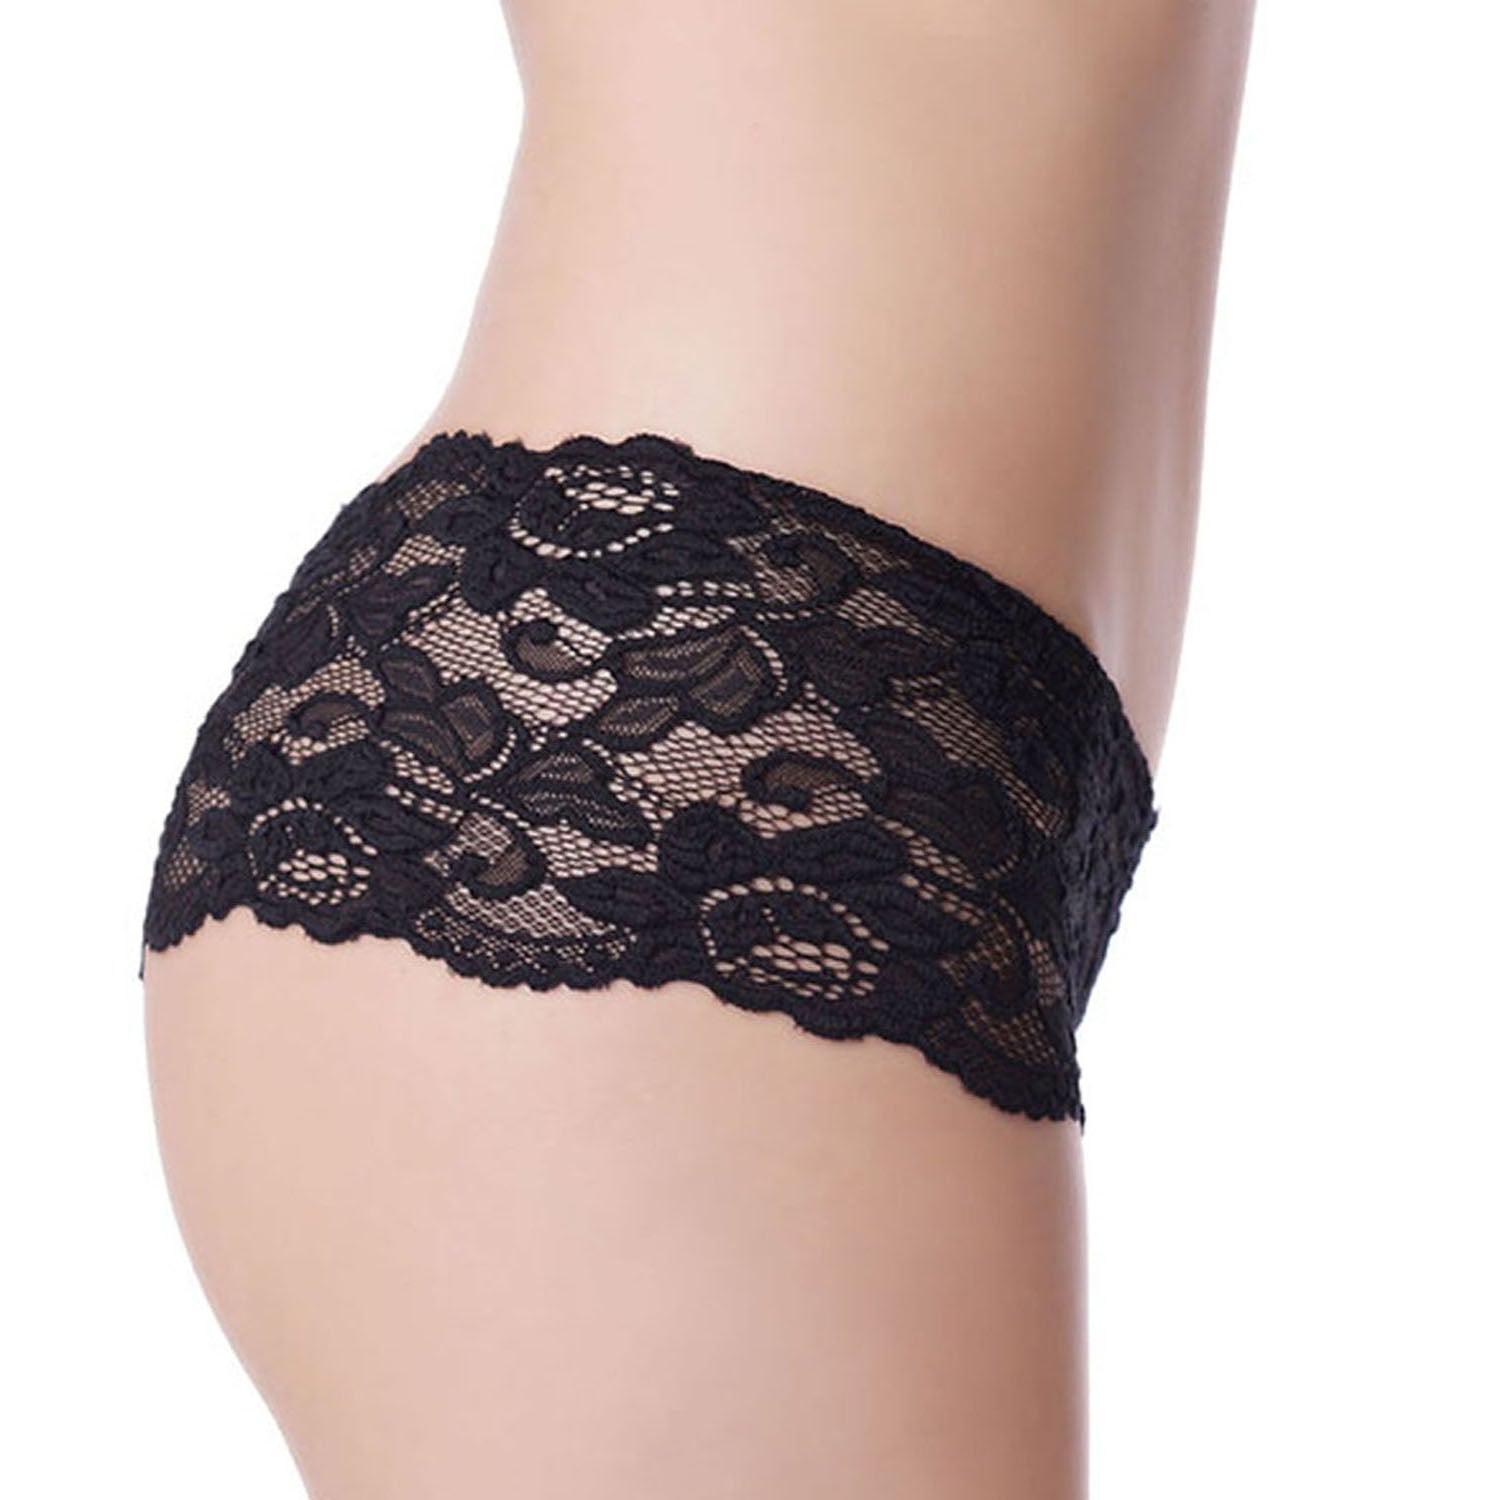 Simply Joshimo Floral Lace French Knickers with Gusset (Black)